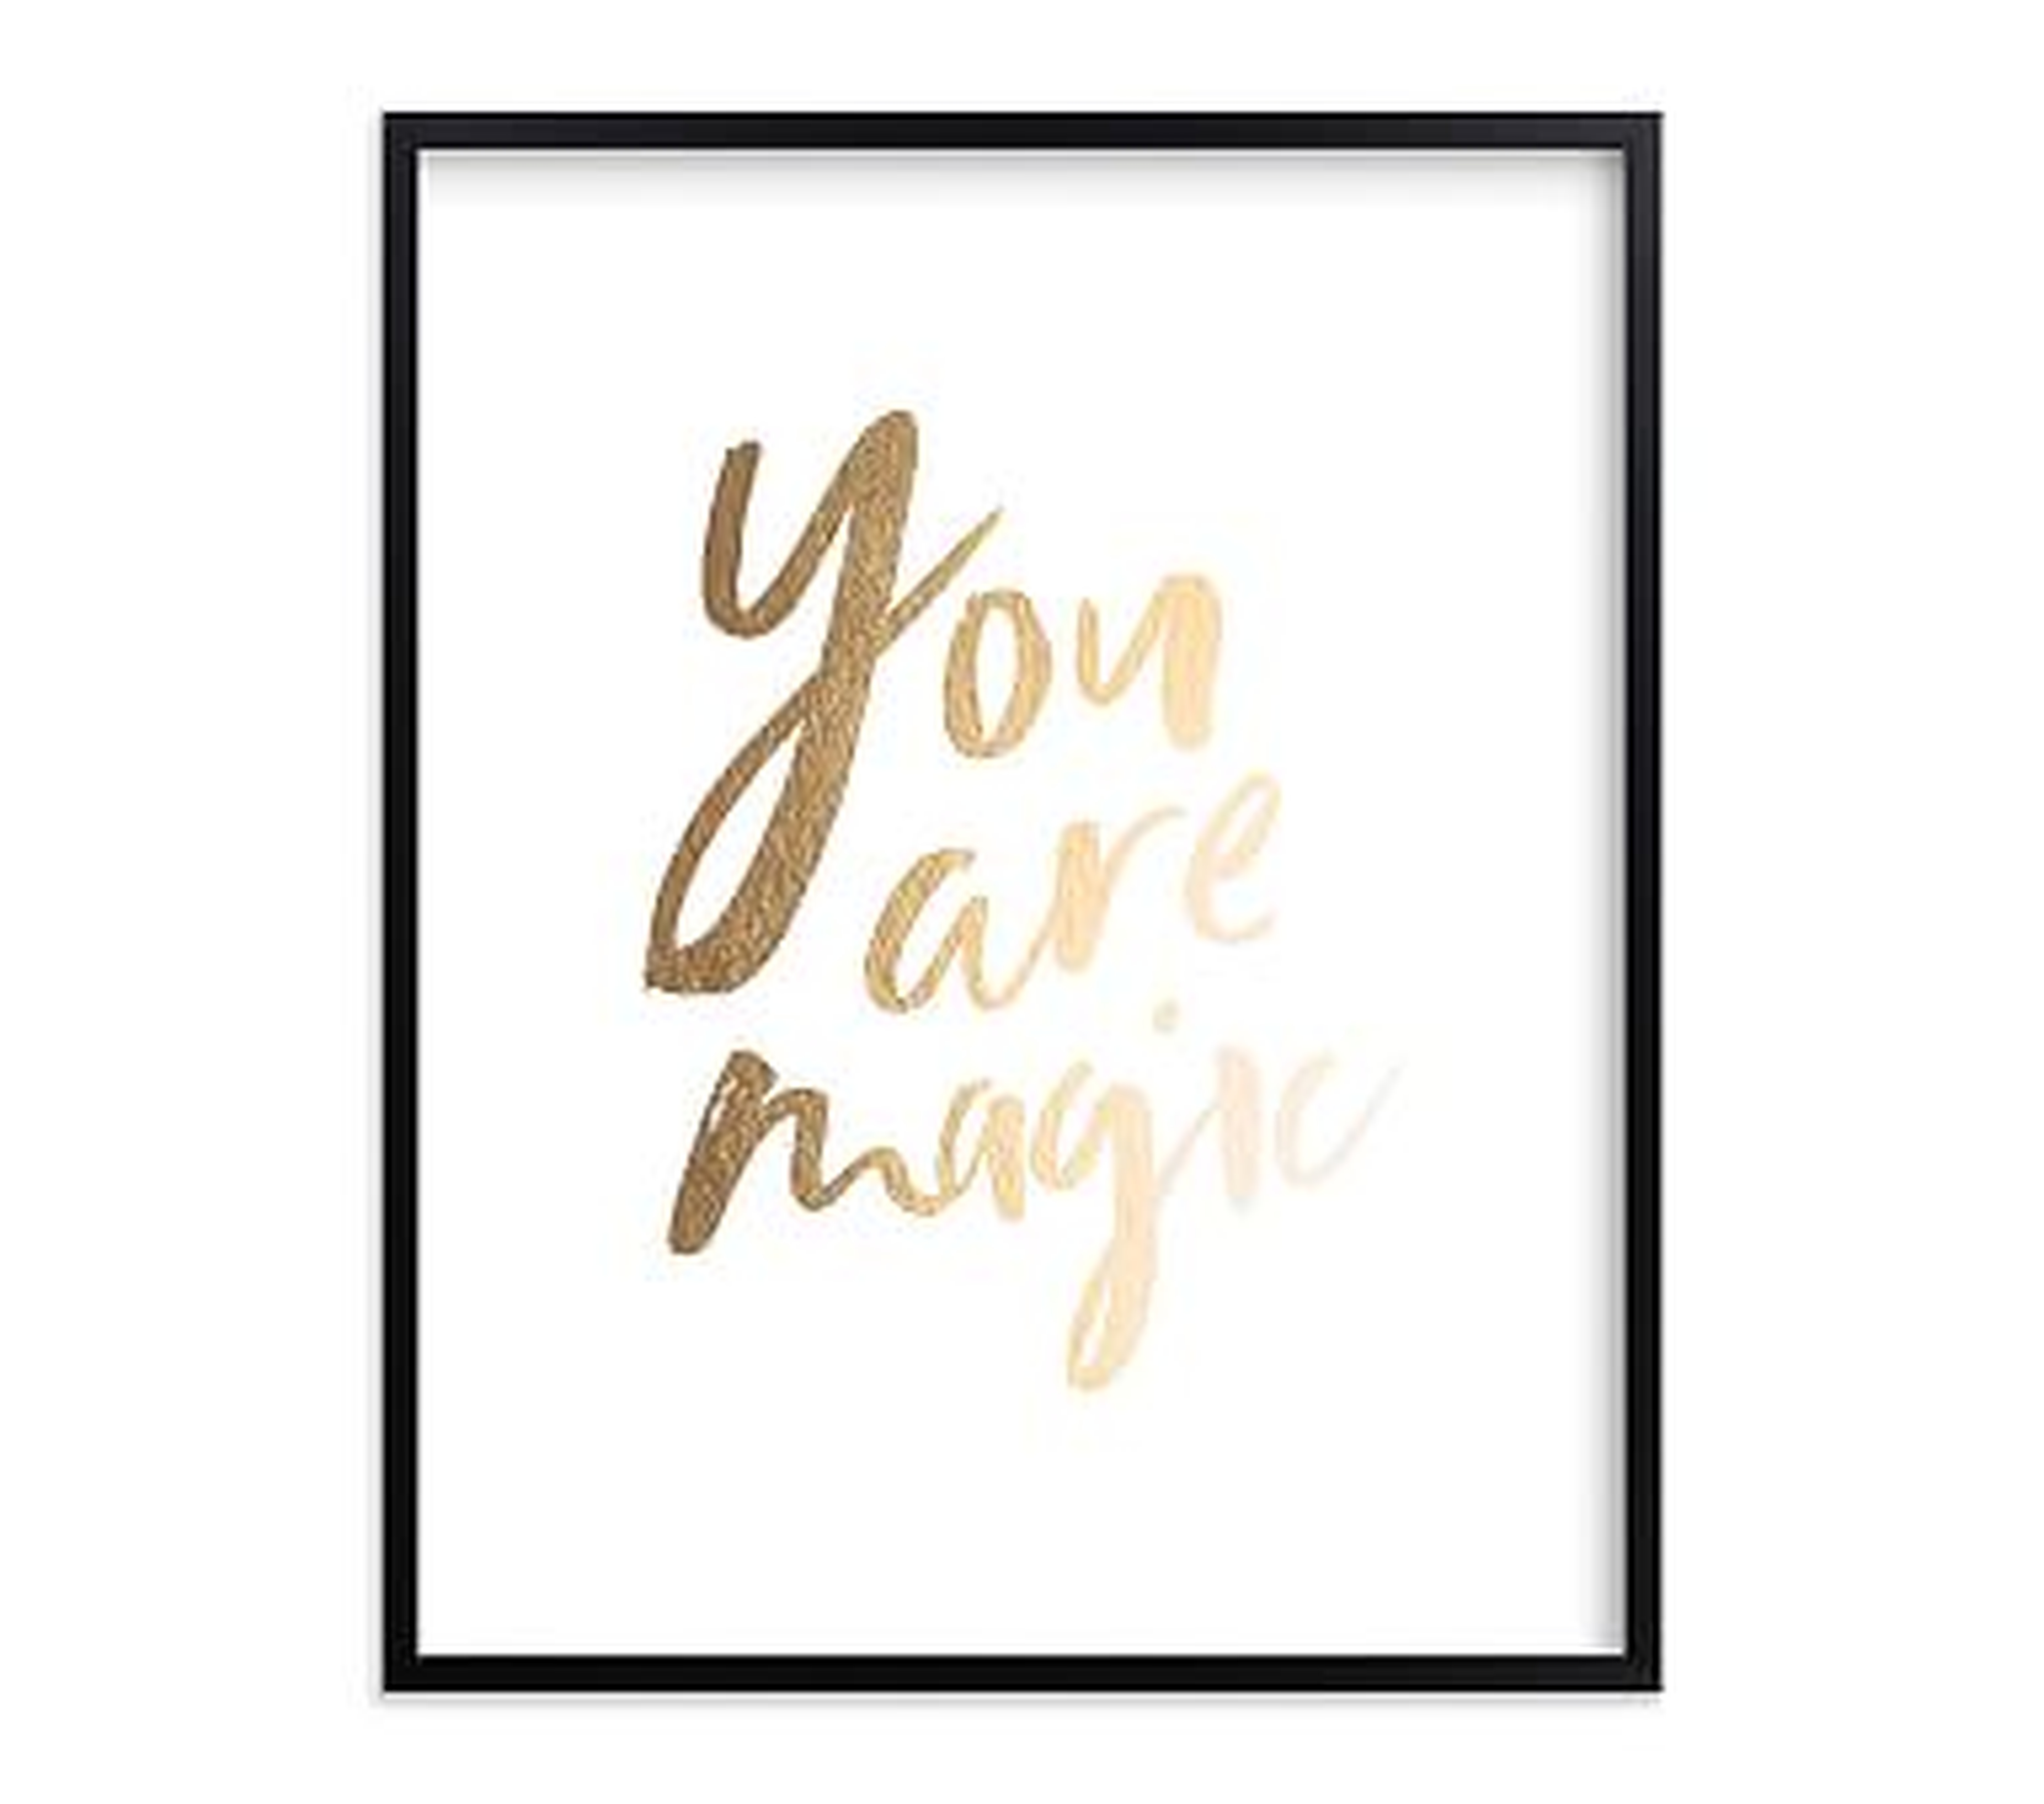 Magical Wall Art by Minted(R), 16x20, Black - Pottery Barn Kids